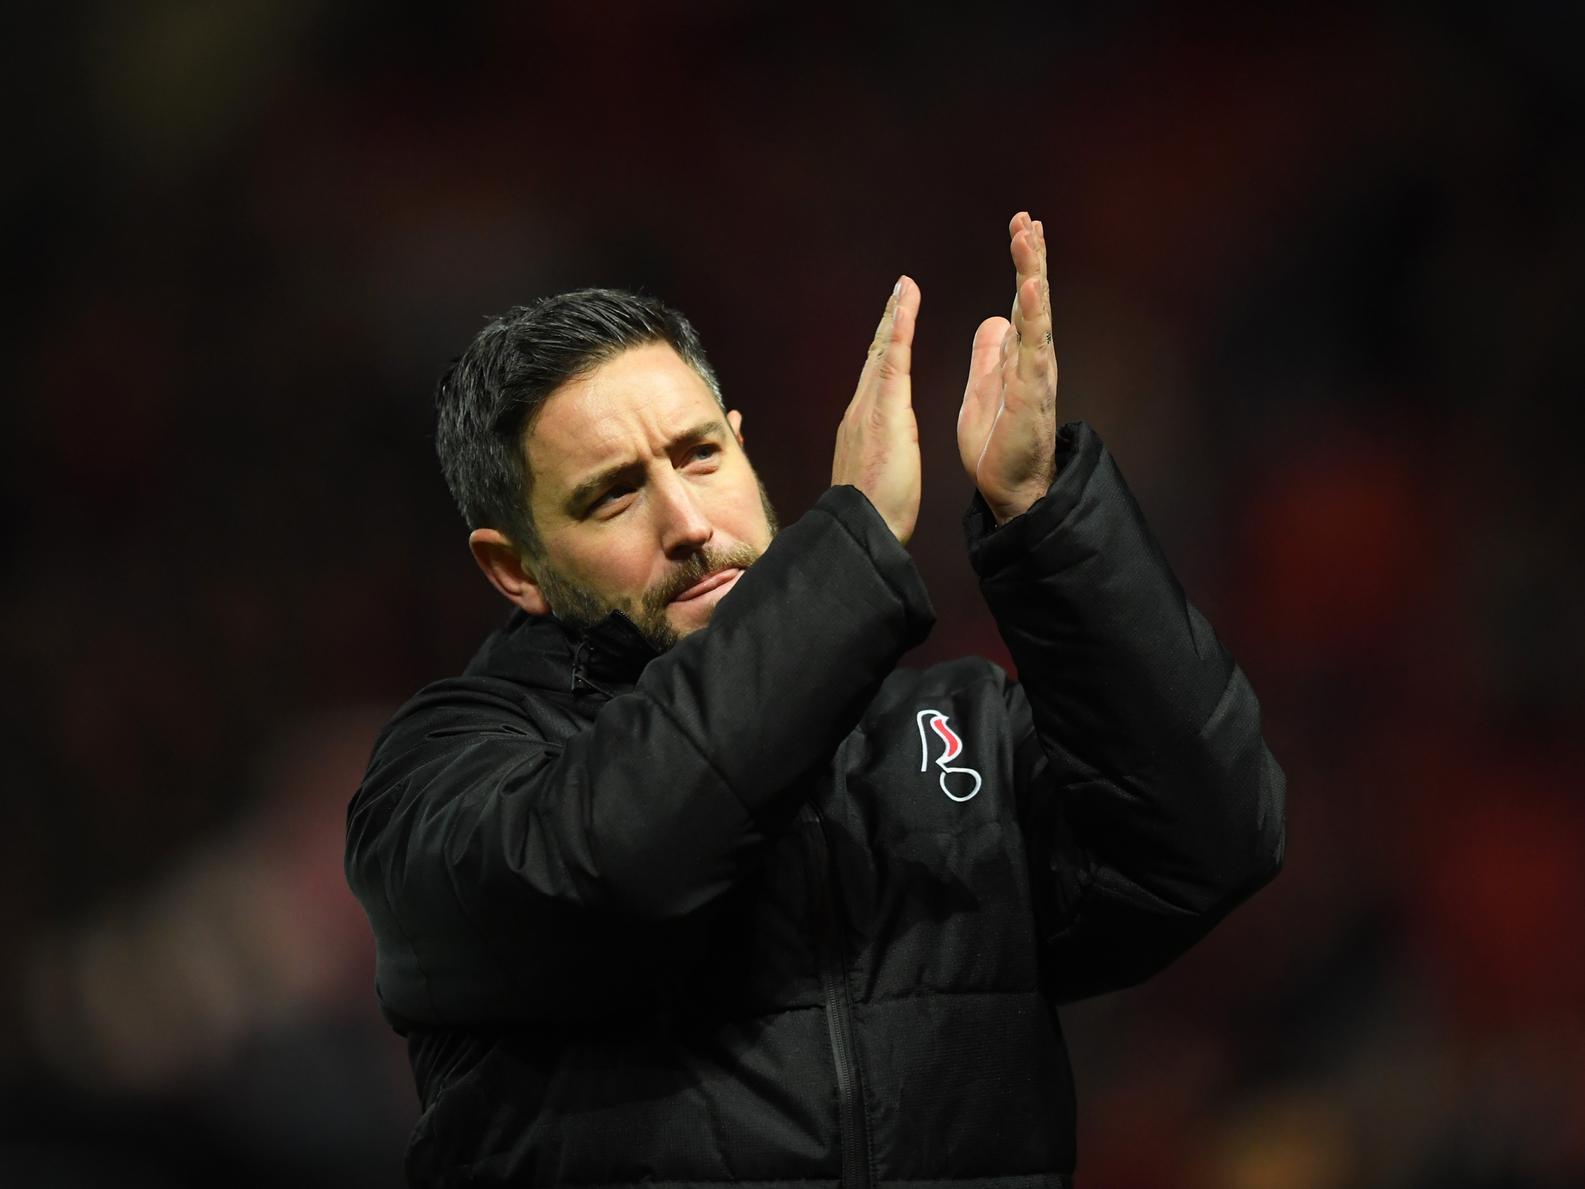 Lee Johnson believed his side were denied a '100 per cent' penalty against Leeds United at Elland Road (Pic: Getty)